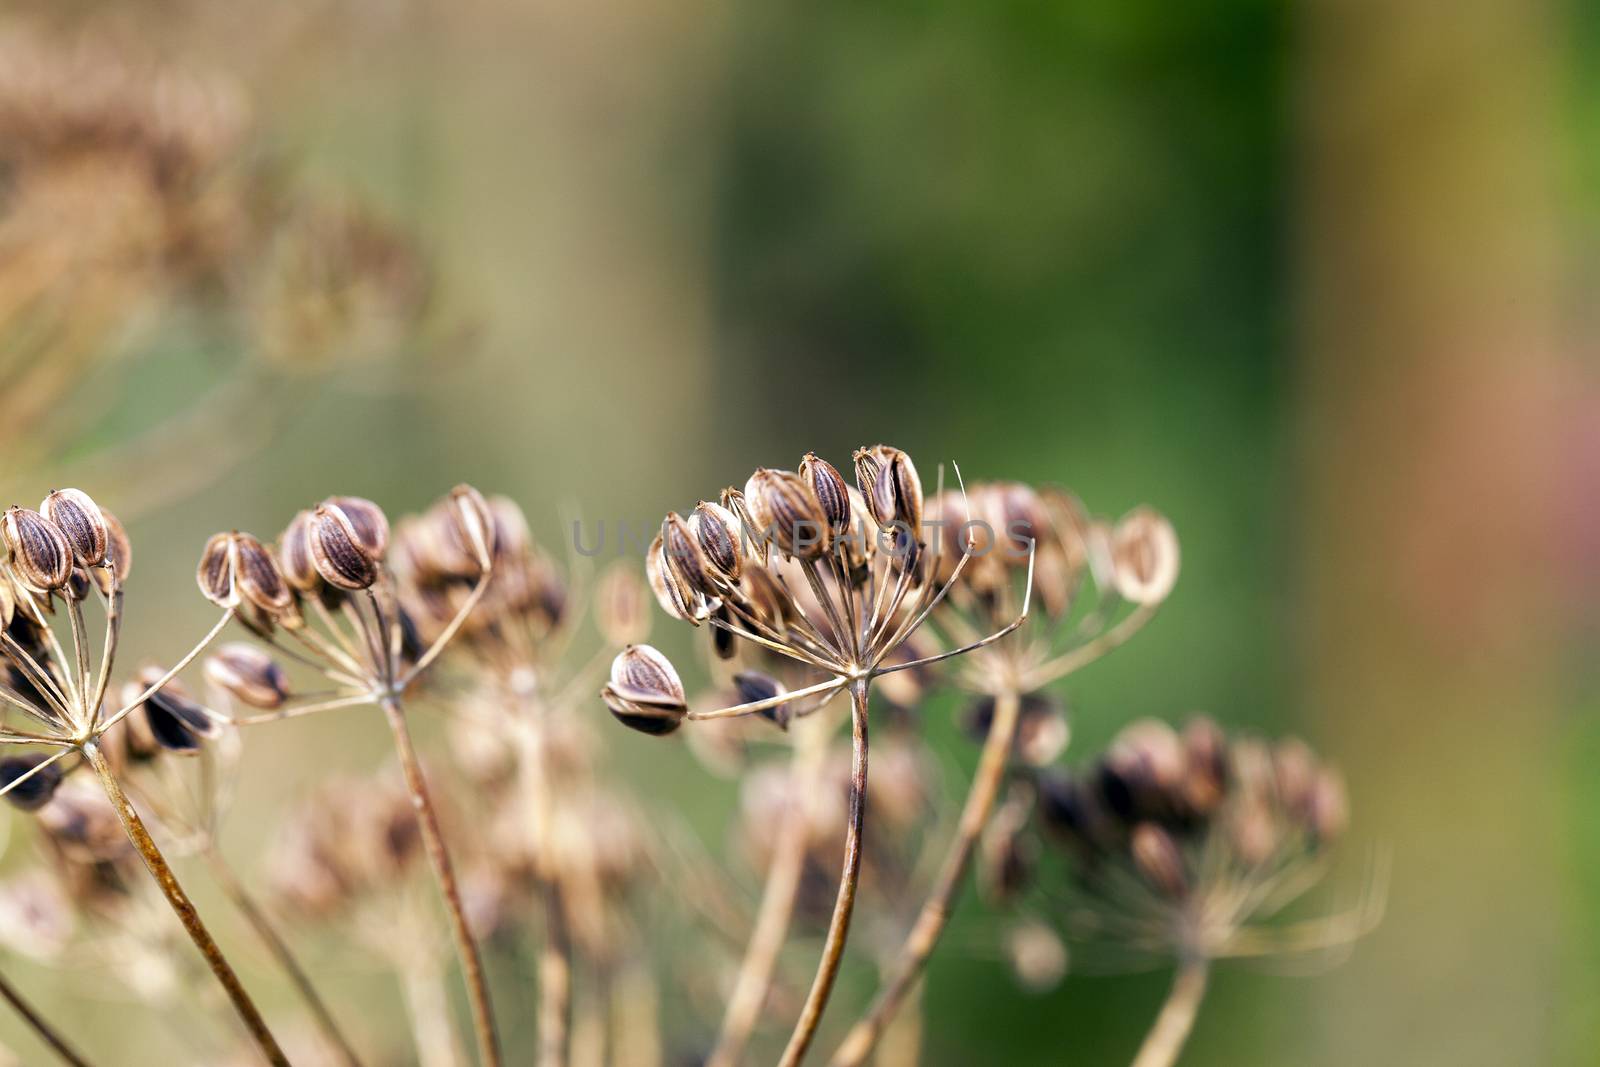 photographed close-up of ripe seeds of dill, a small depth of field